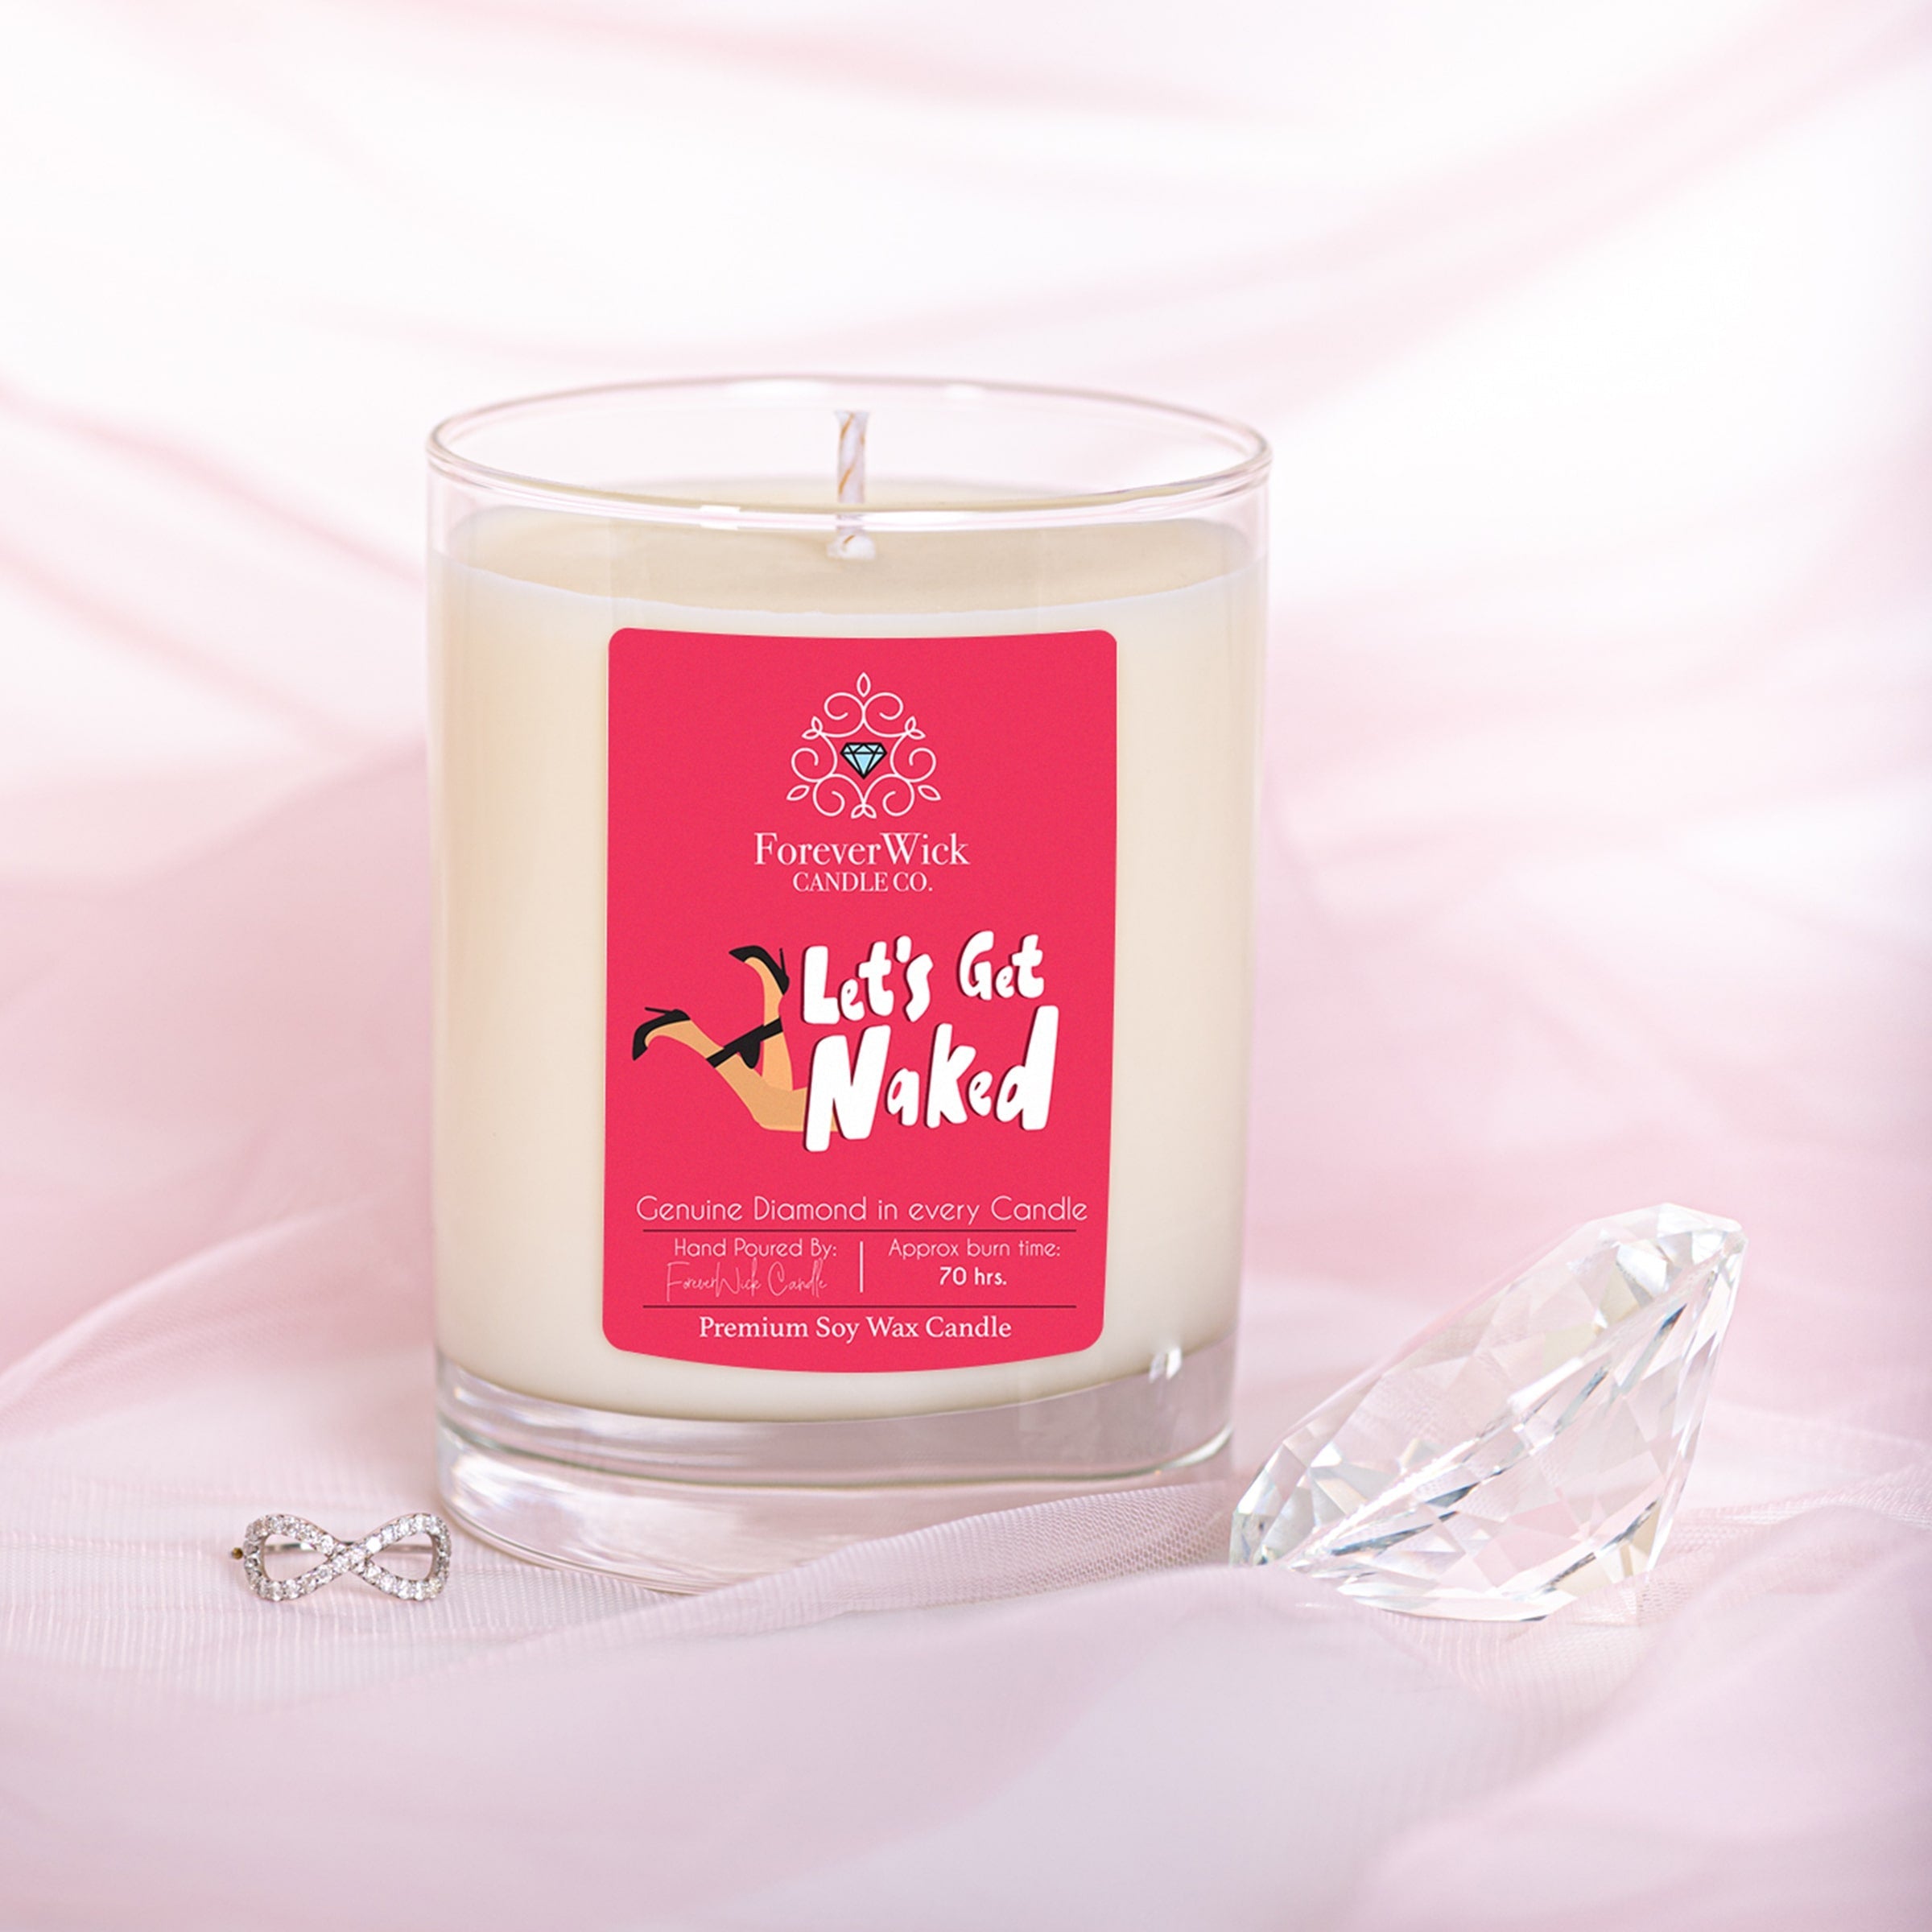 Let's Get Naked Diamond Candle Special